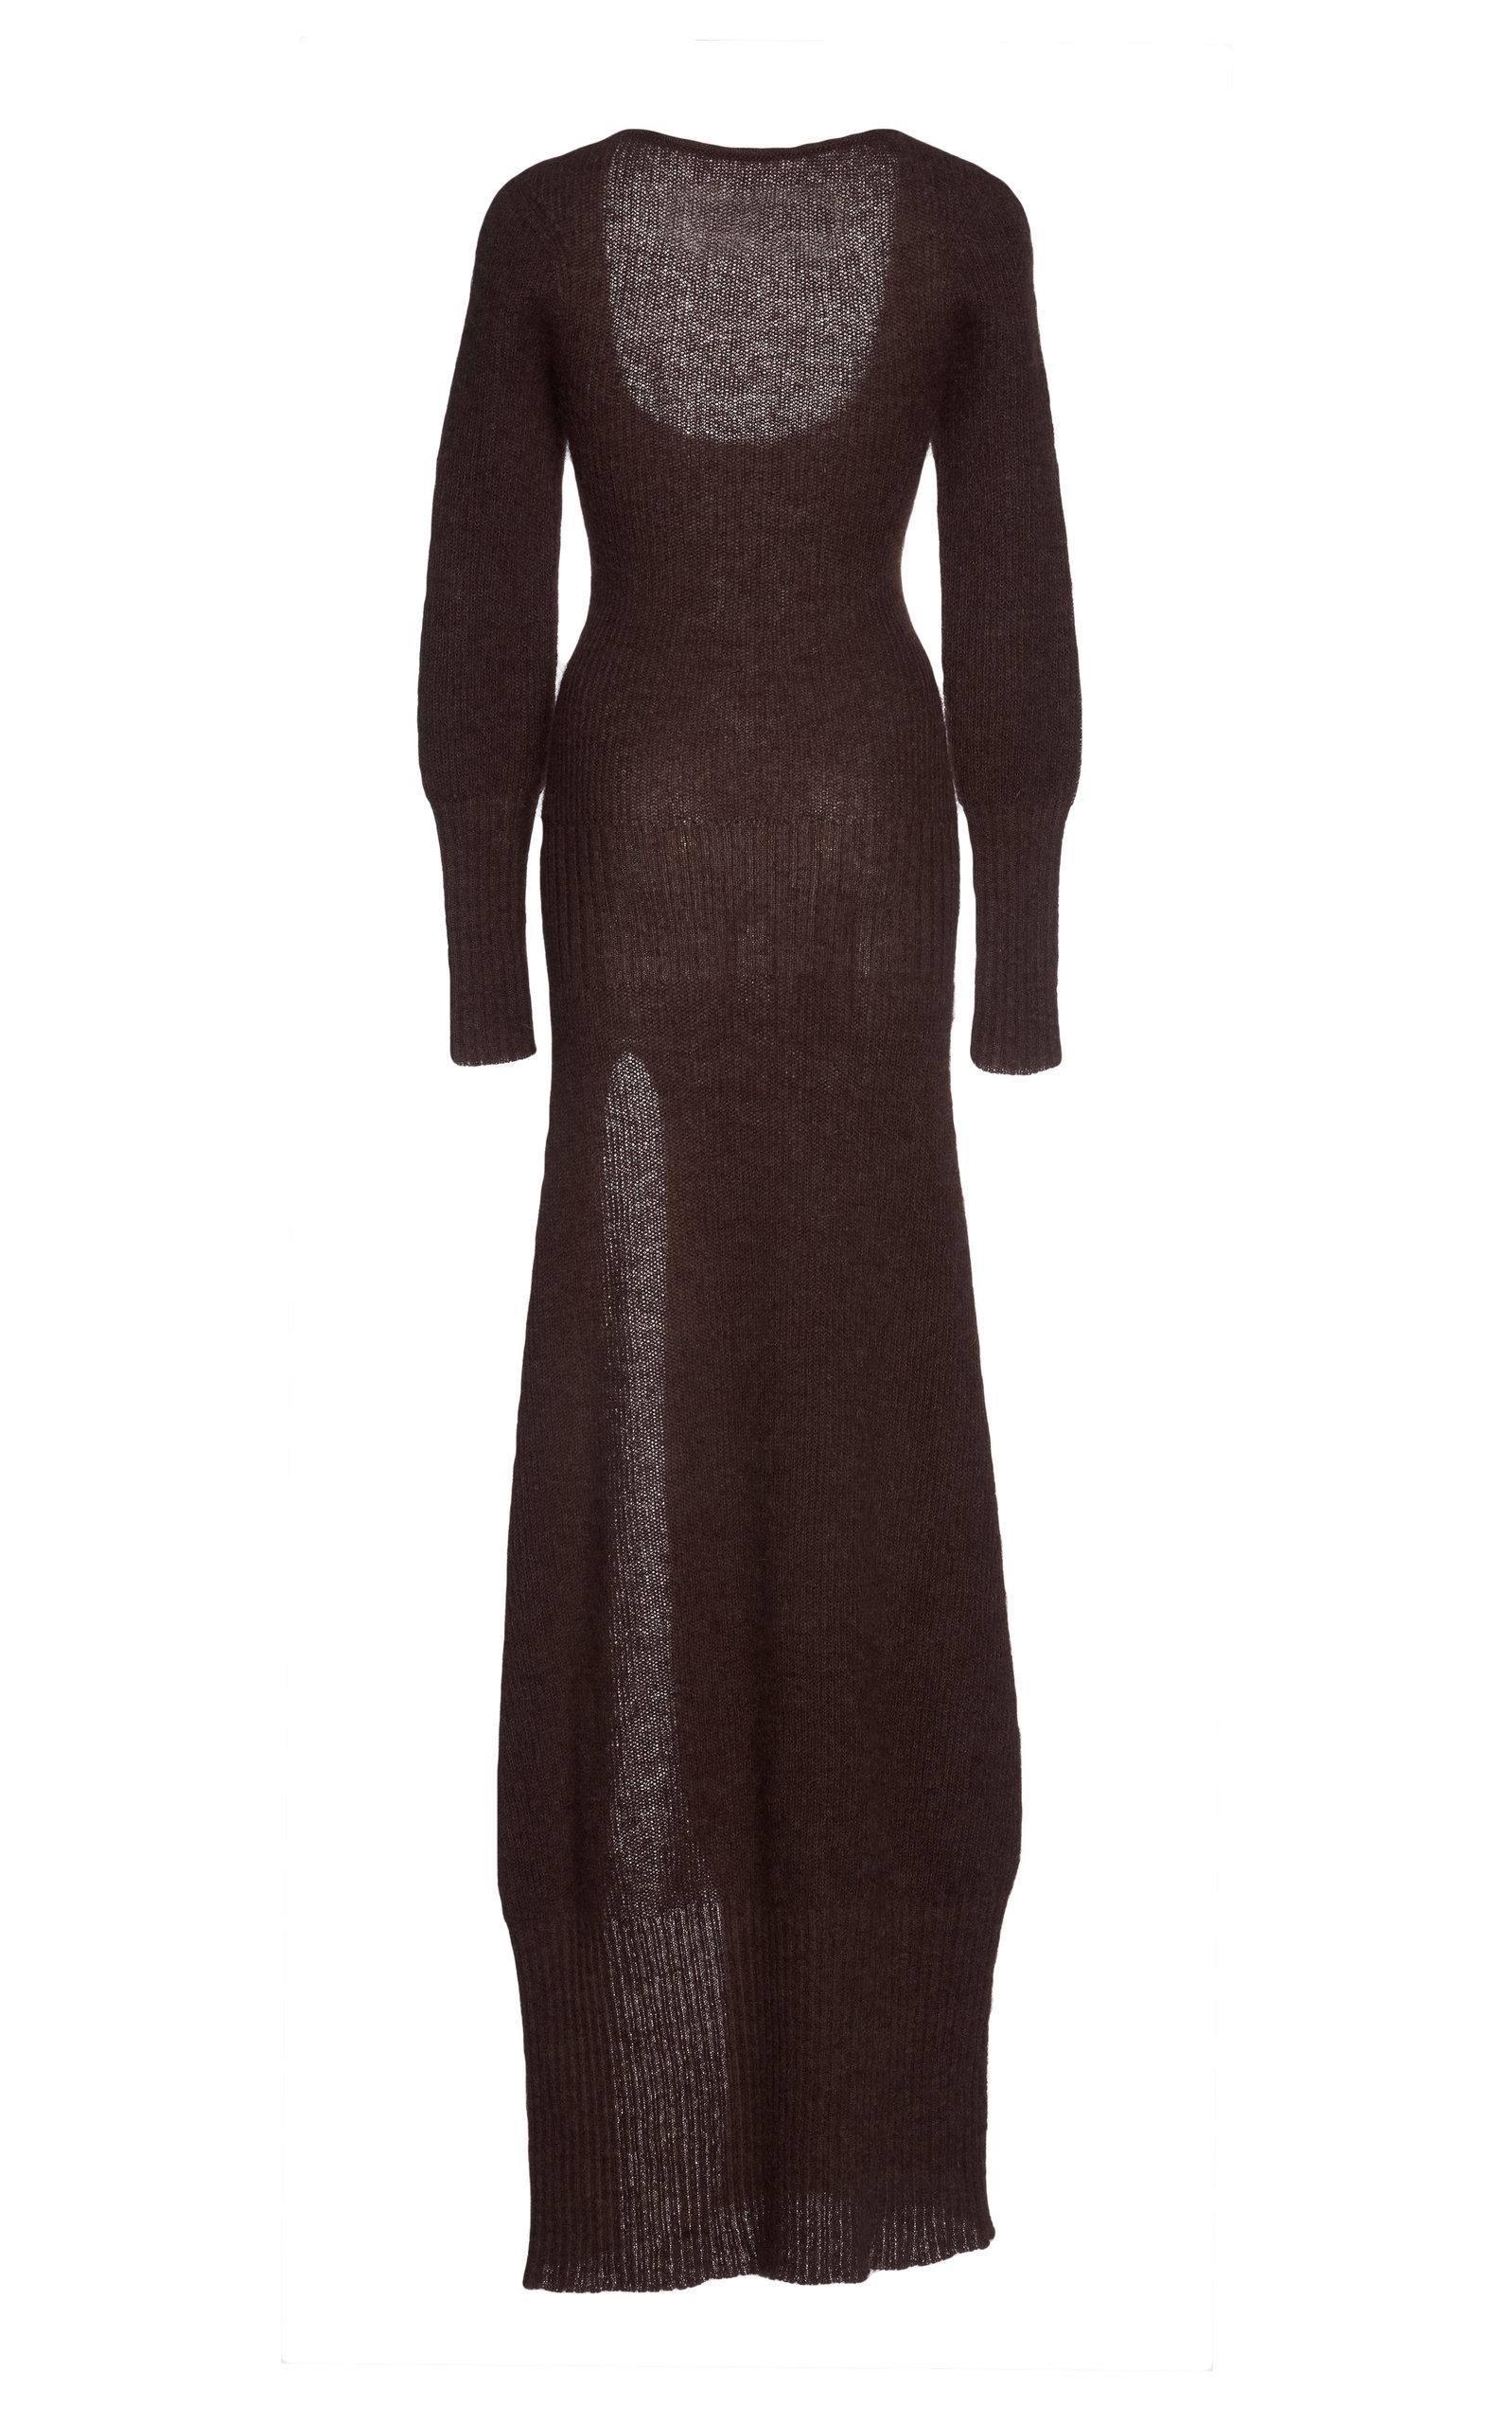 Buy > jacquemus dress knit > in stock